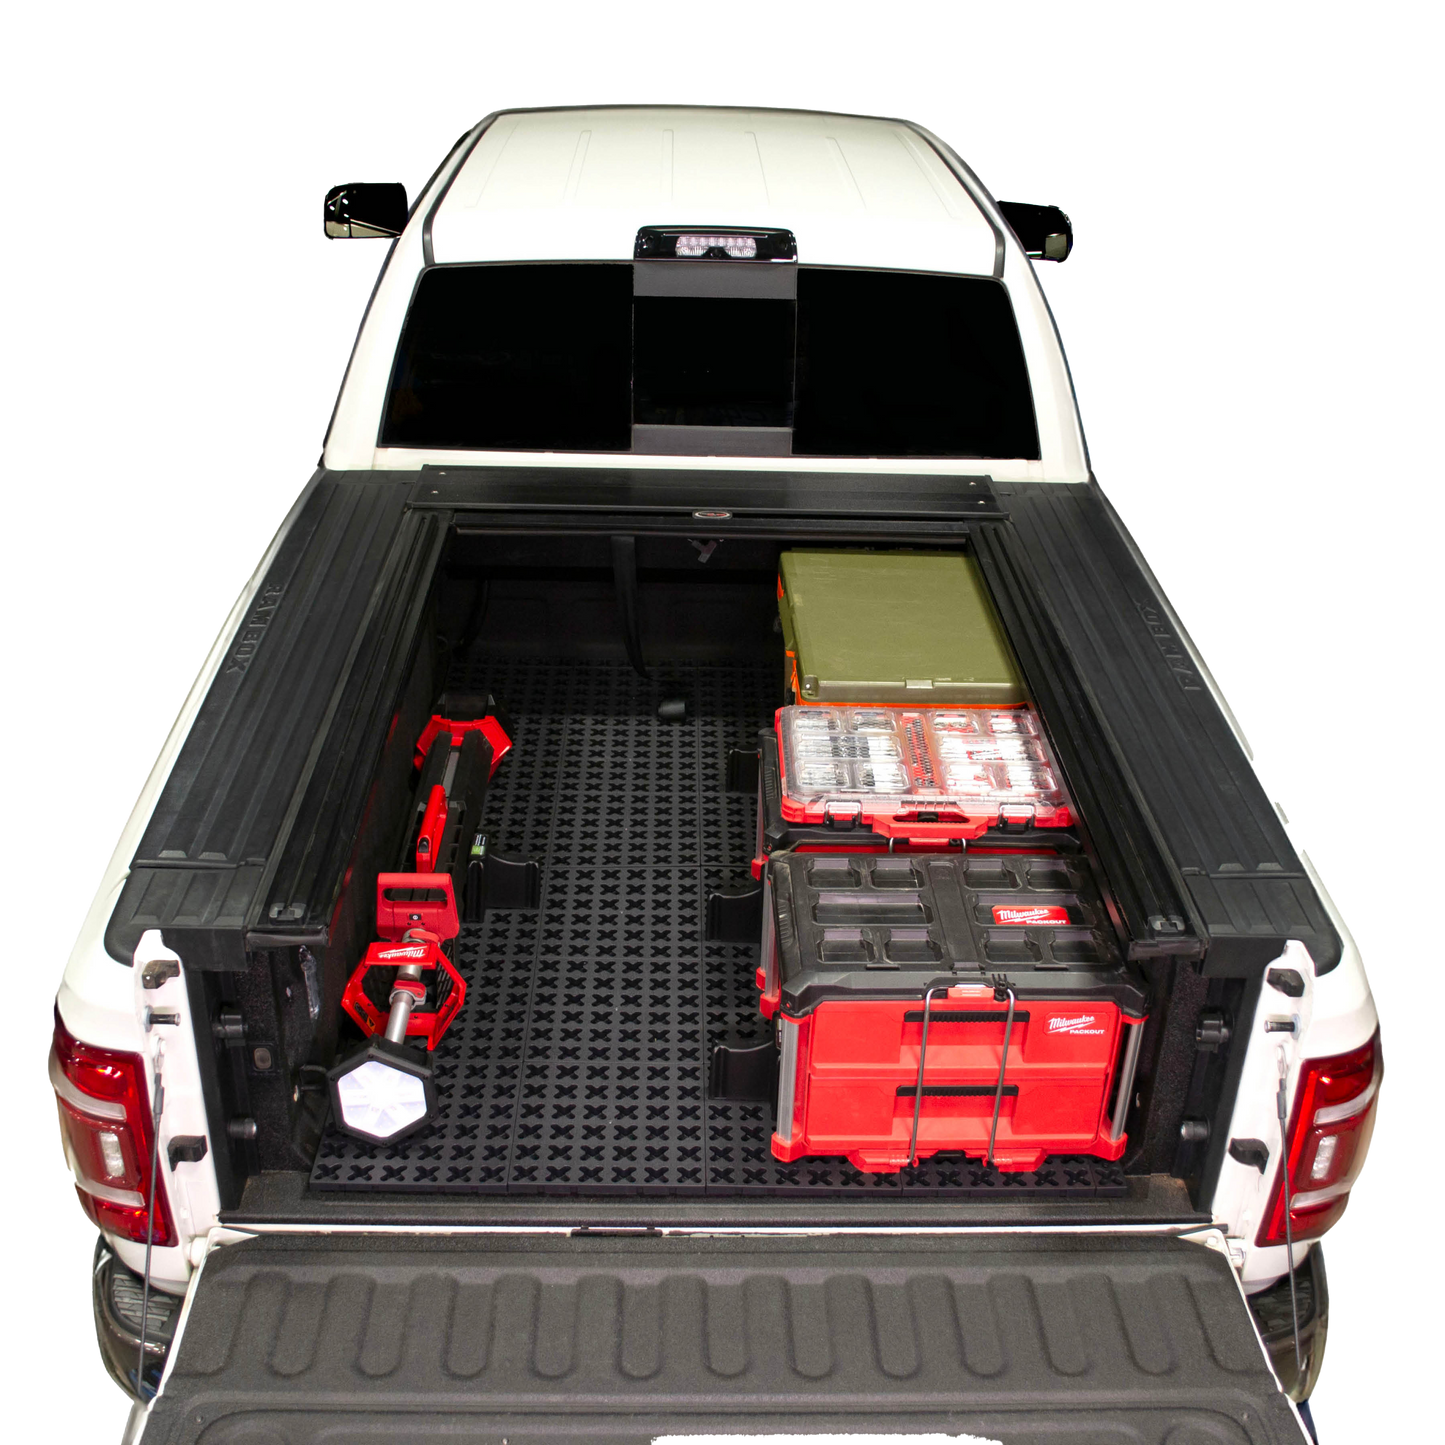 Tmat in Ram truck bed with Milwaukee Packouts, a Rtic cooler, and Milwaukee shop light.